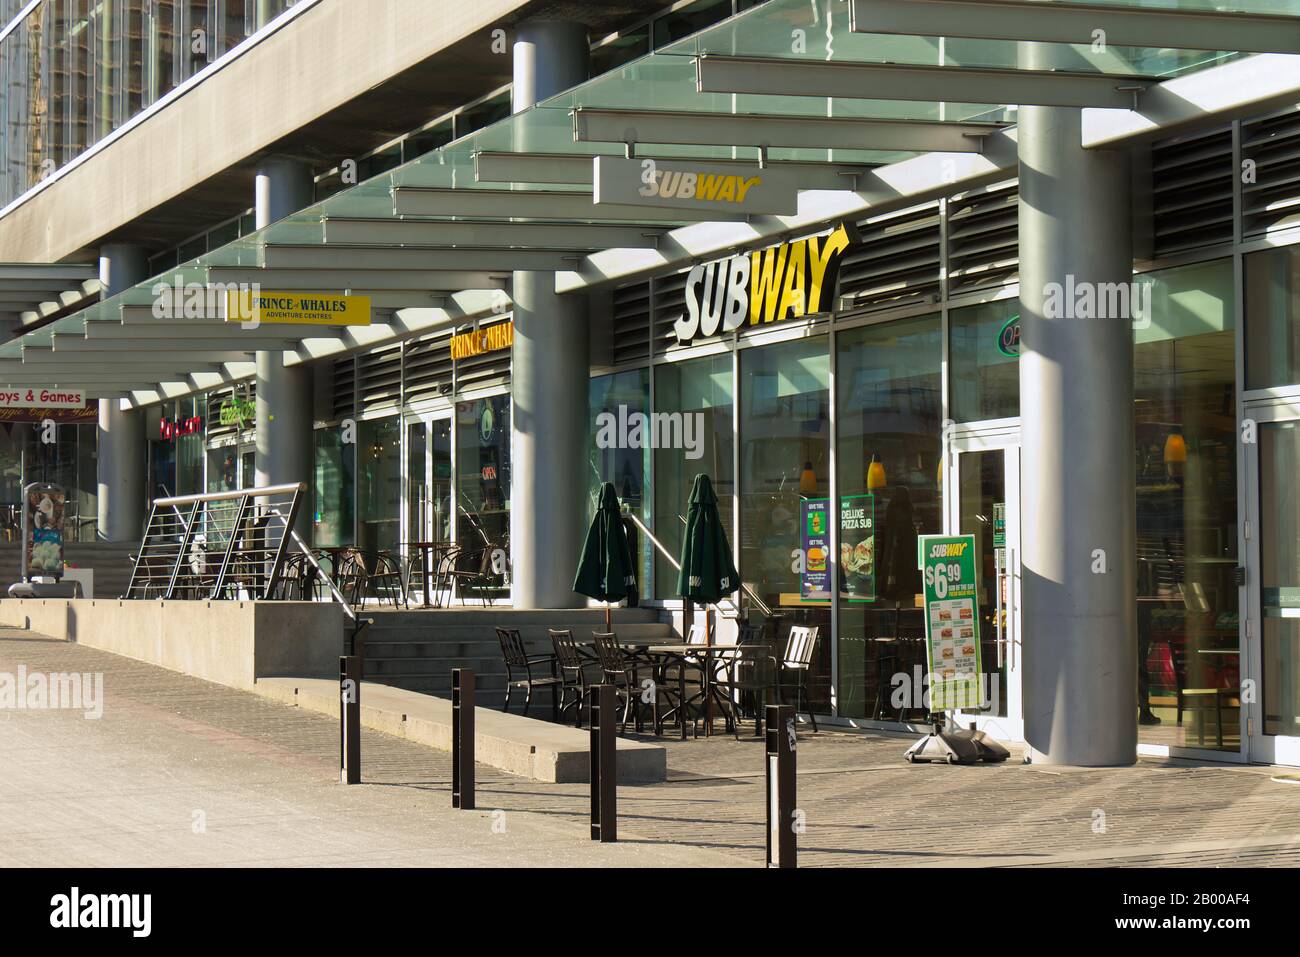 Vancouver, Canada - November 29, 2019: View of popular restaurant 'Subway' inside of Vancouver Convention Centre West during the sunny day Stock Photo